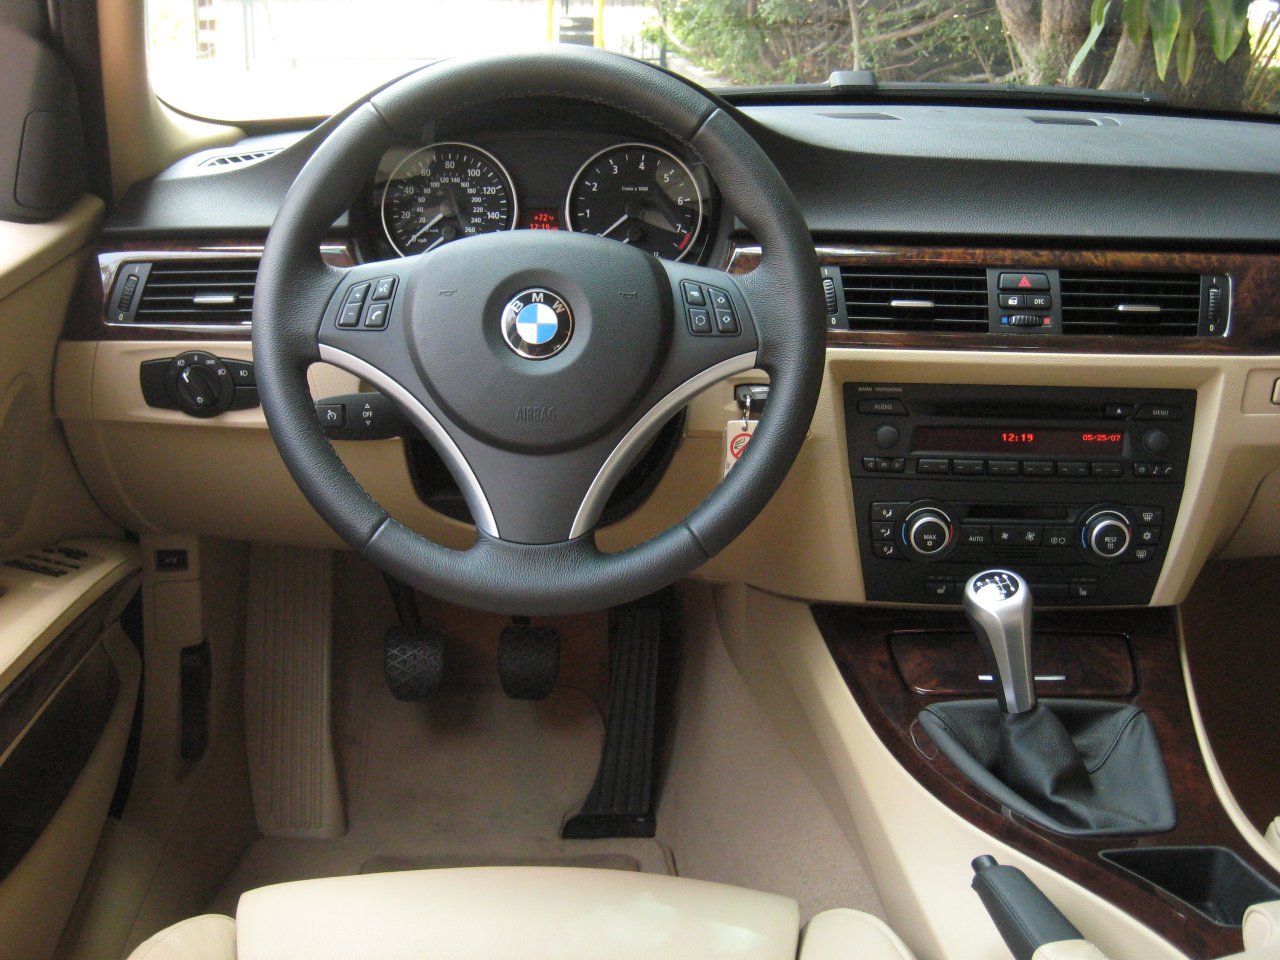 Read more: 2007 BMW 328i test drive and review